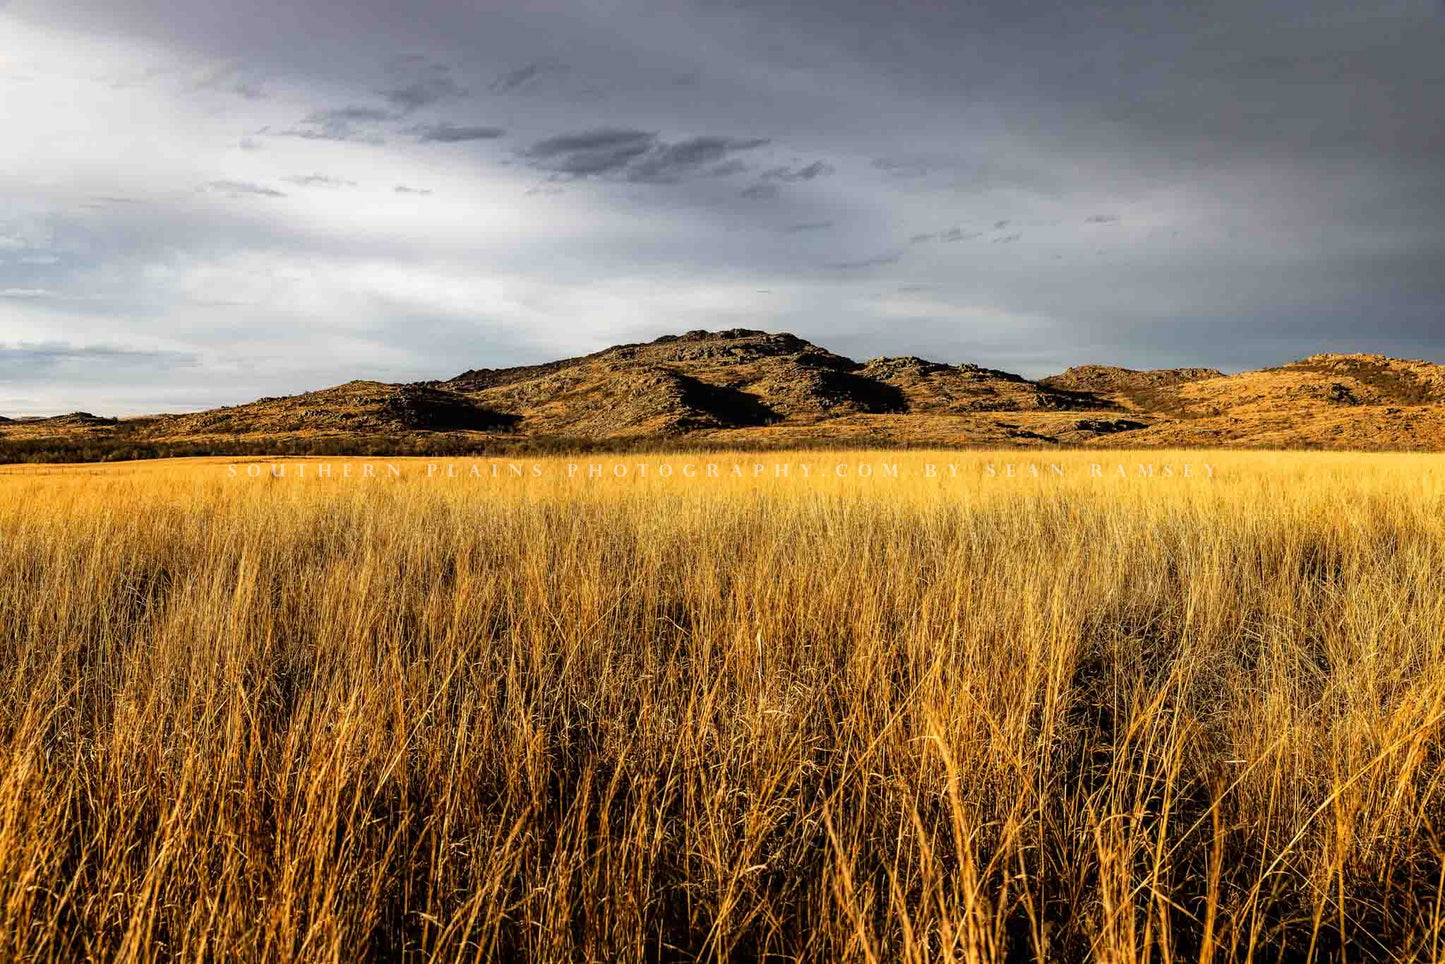 Landscape photography print of the Wichita Mountains overlooking golden prairie grass on a late autumn day at the Wichita Mountains Wildlife Refuge in Oklahoma by Sean Ramsey of Southern Plains Photography.